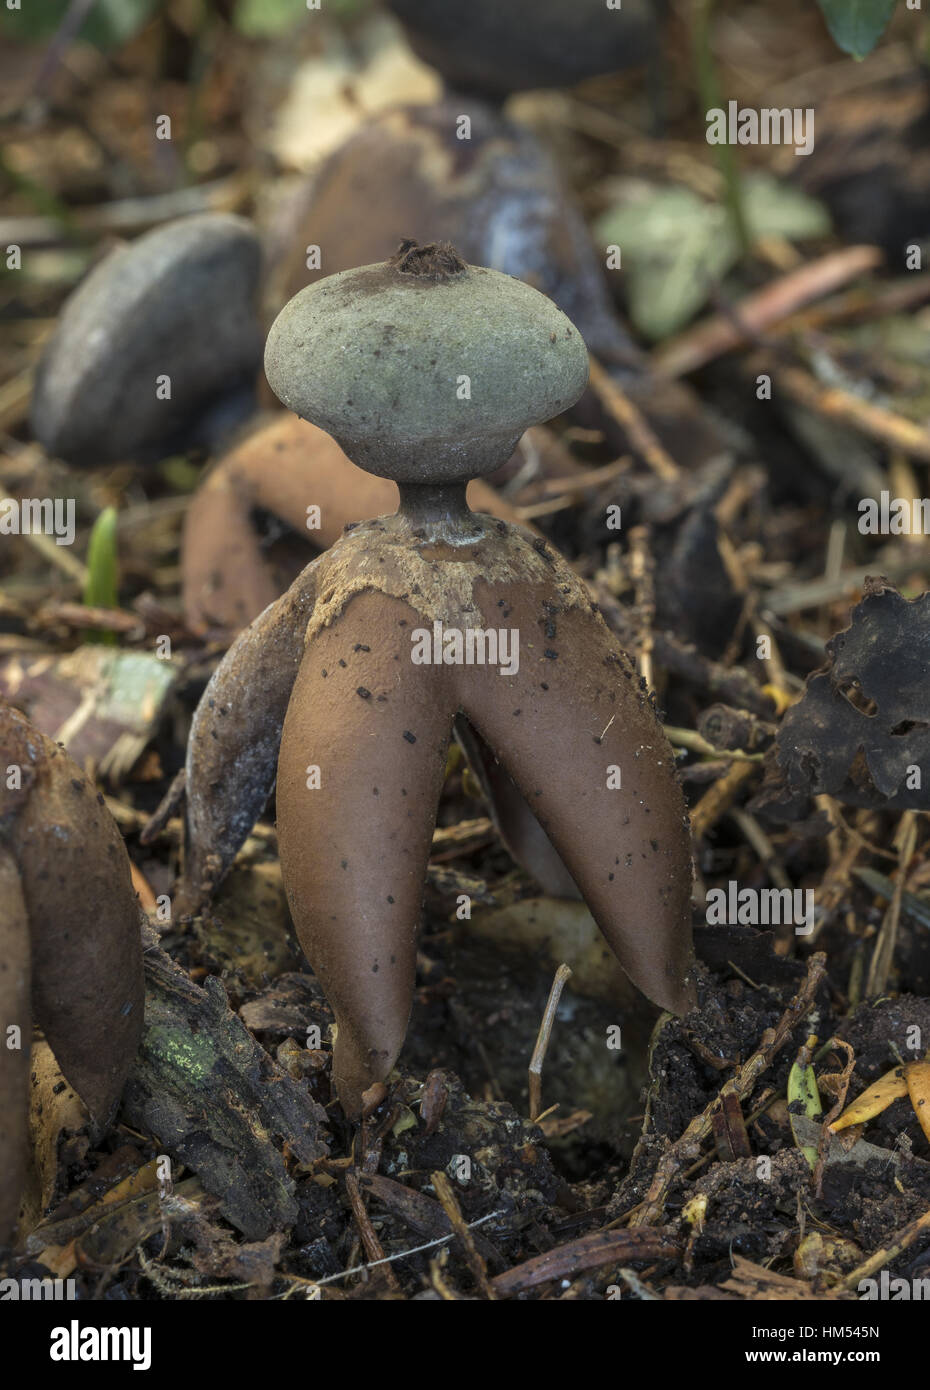 A rare fornicate earthstar, Geastrum fornicatum, under yew trees in churchyard, Radnorshire. Stock Photo